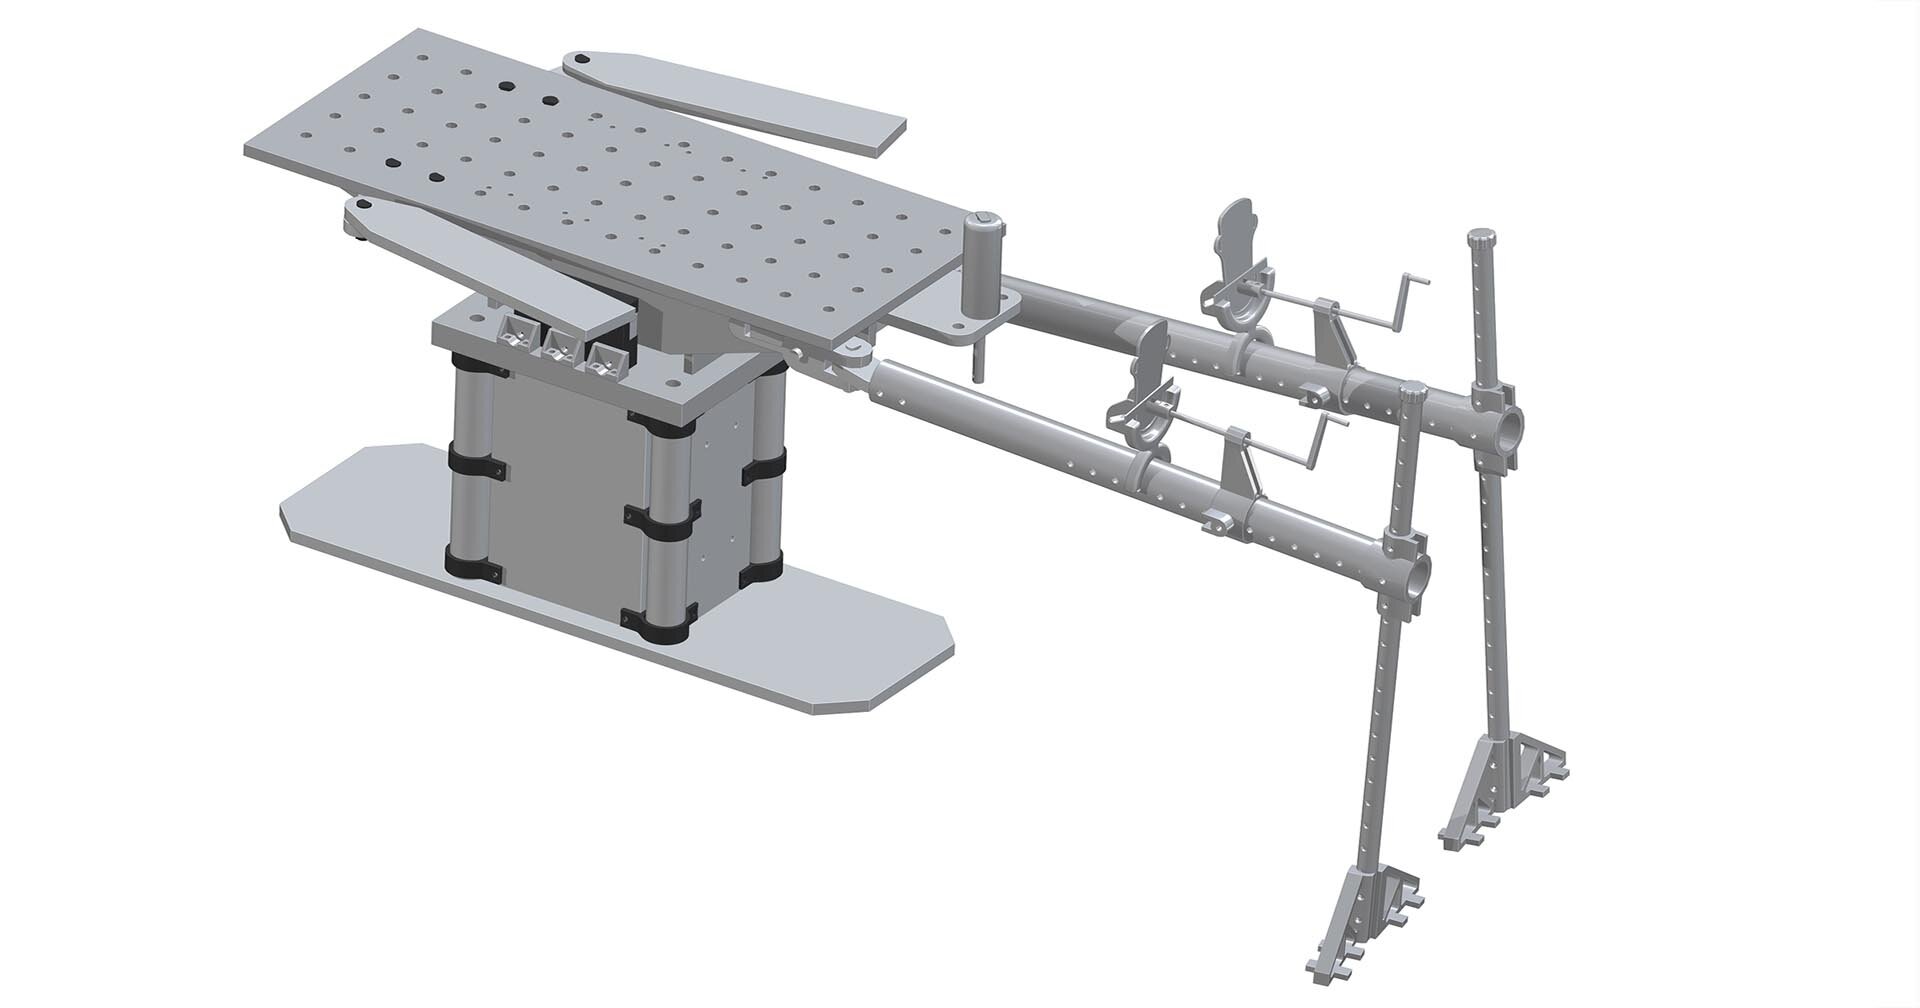 open-source-tech-enabled 3d printed surgical table